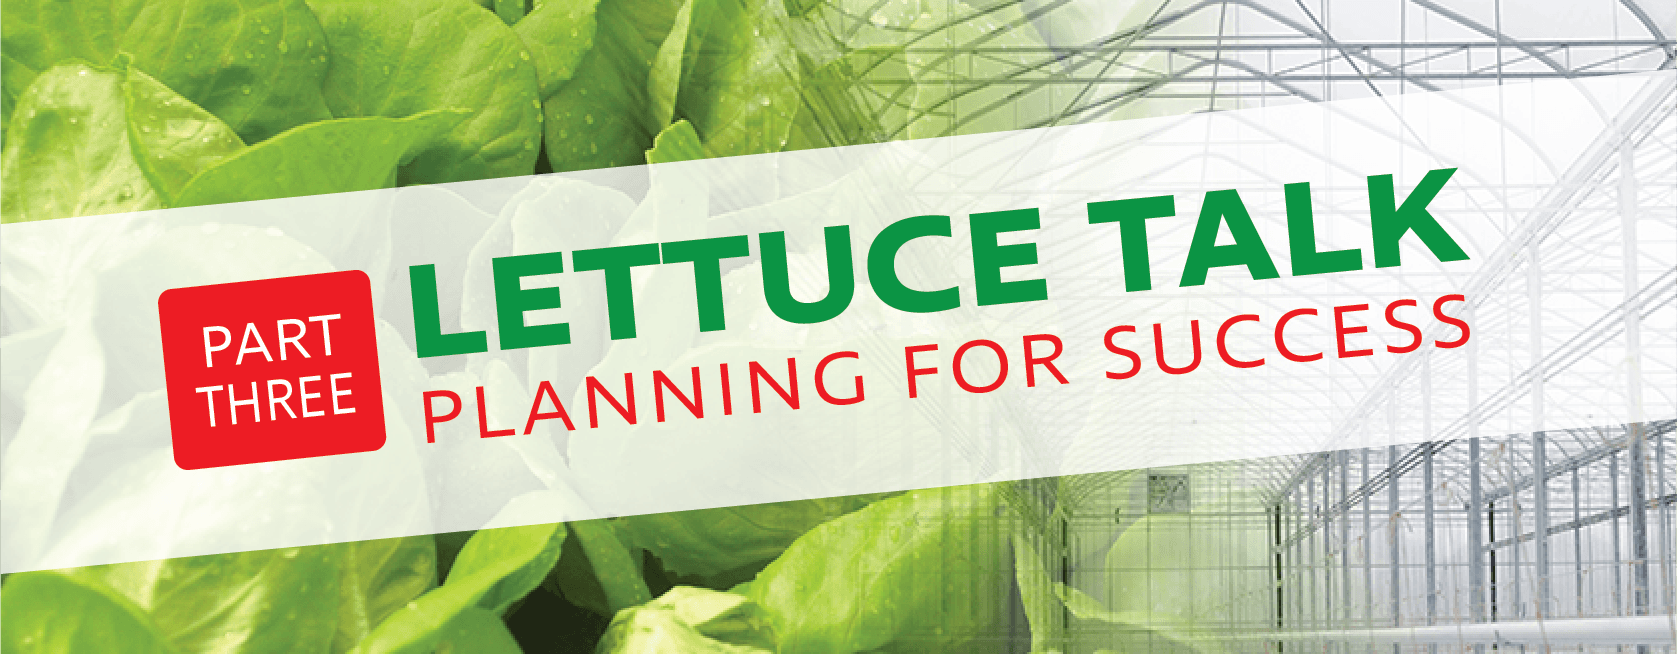 Pulling the Plan Together for Successful Lettuce Growing in Greenhouse Production